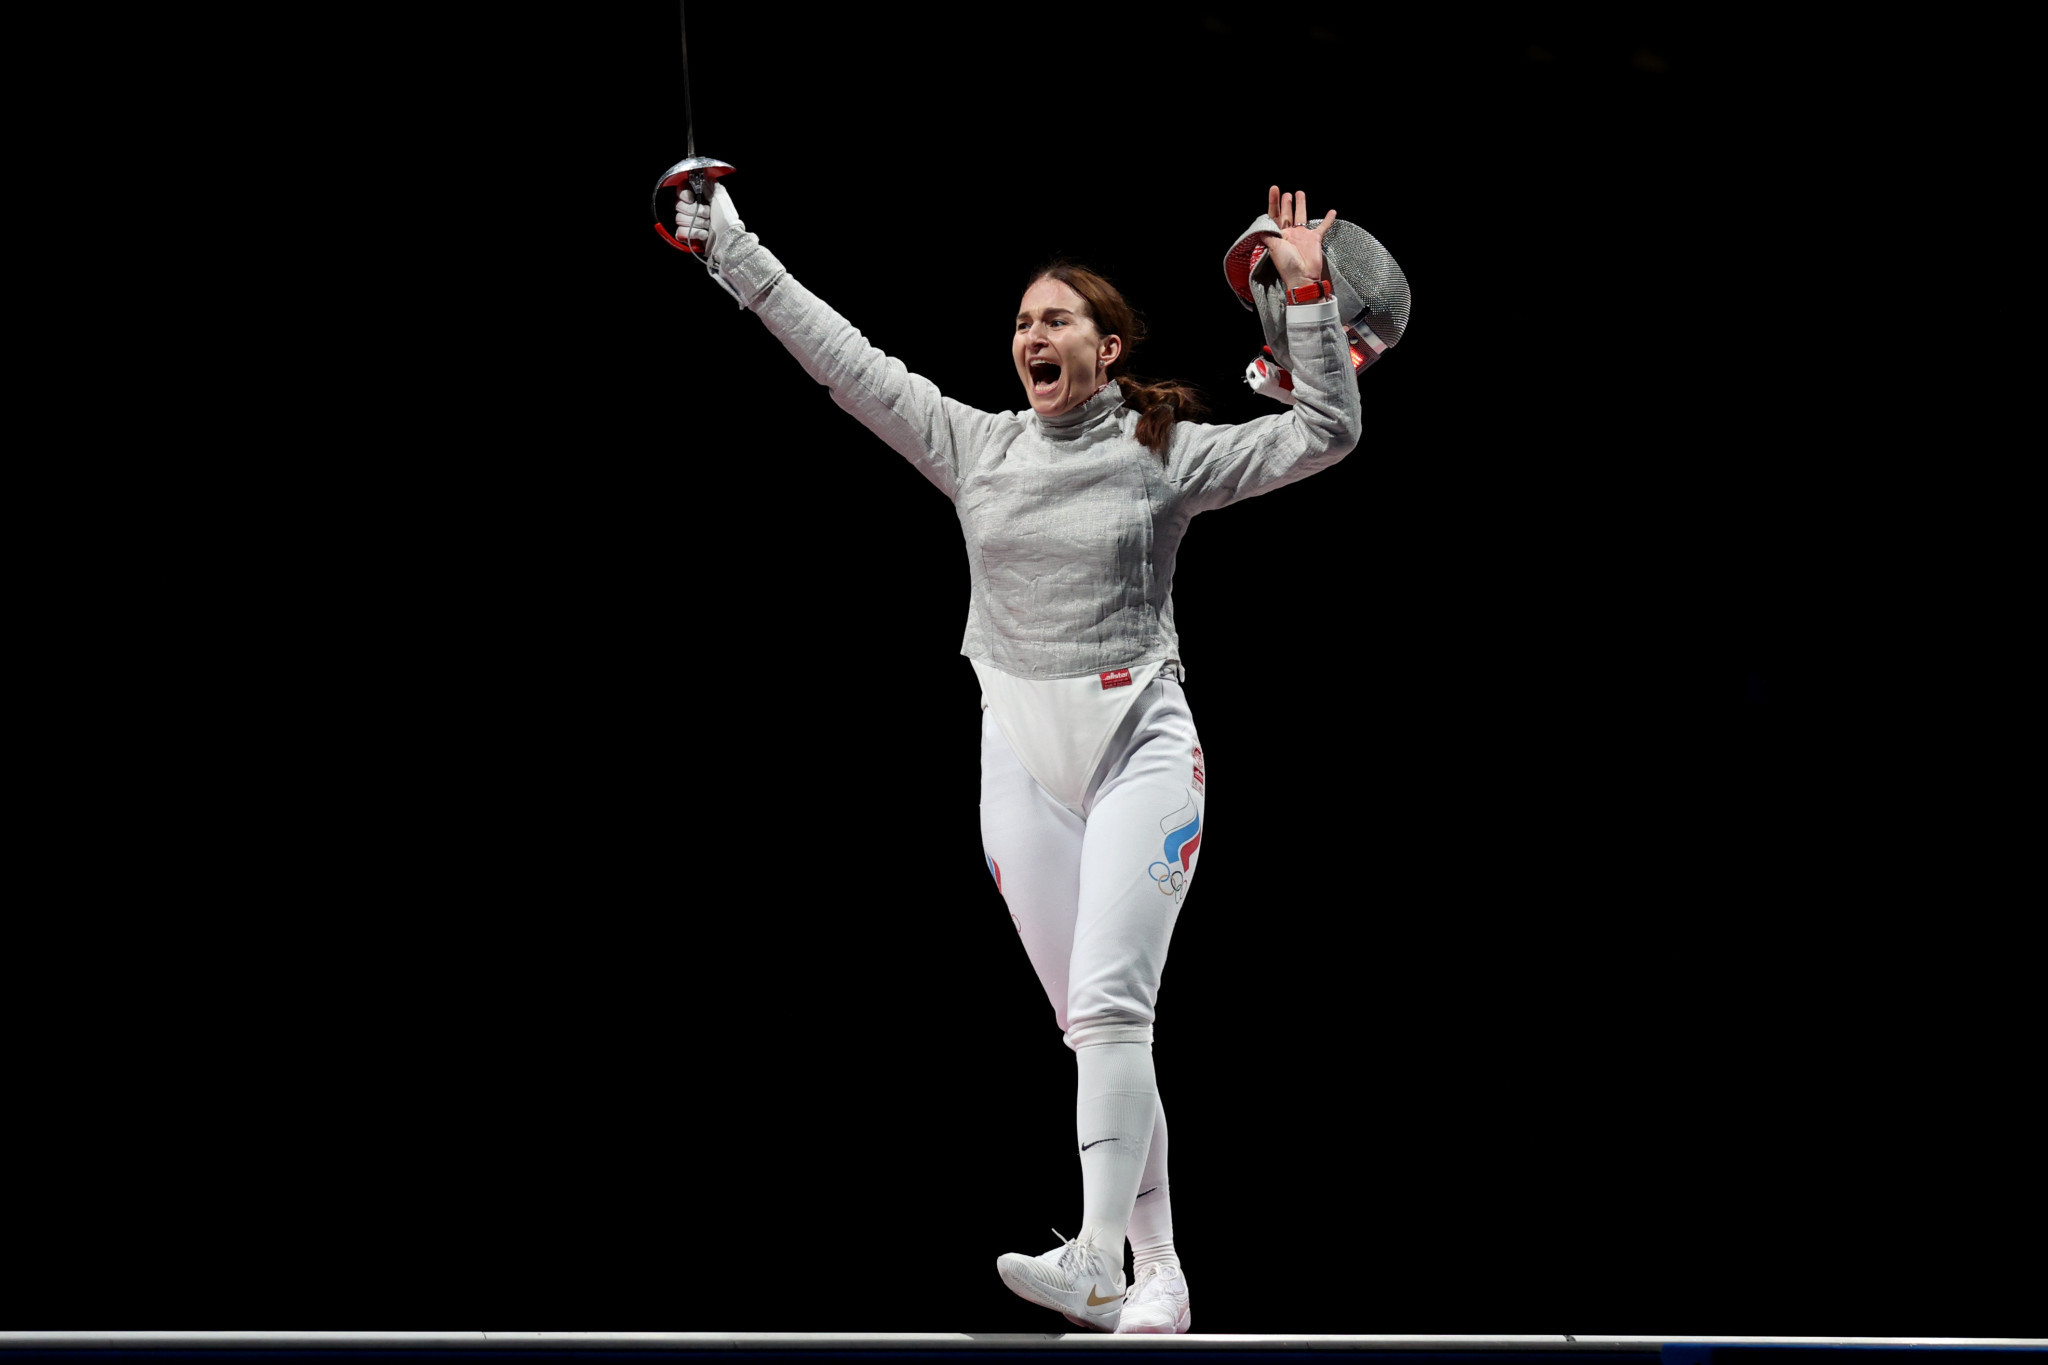 Sofia Velikaya is one of three Olympic champions barred from competing at the Fencing World Championships ©Getty Images